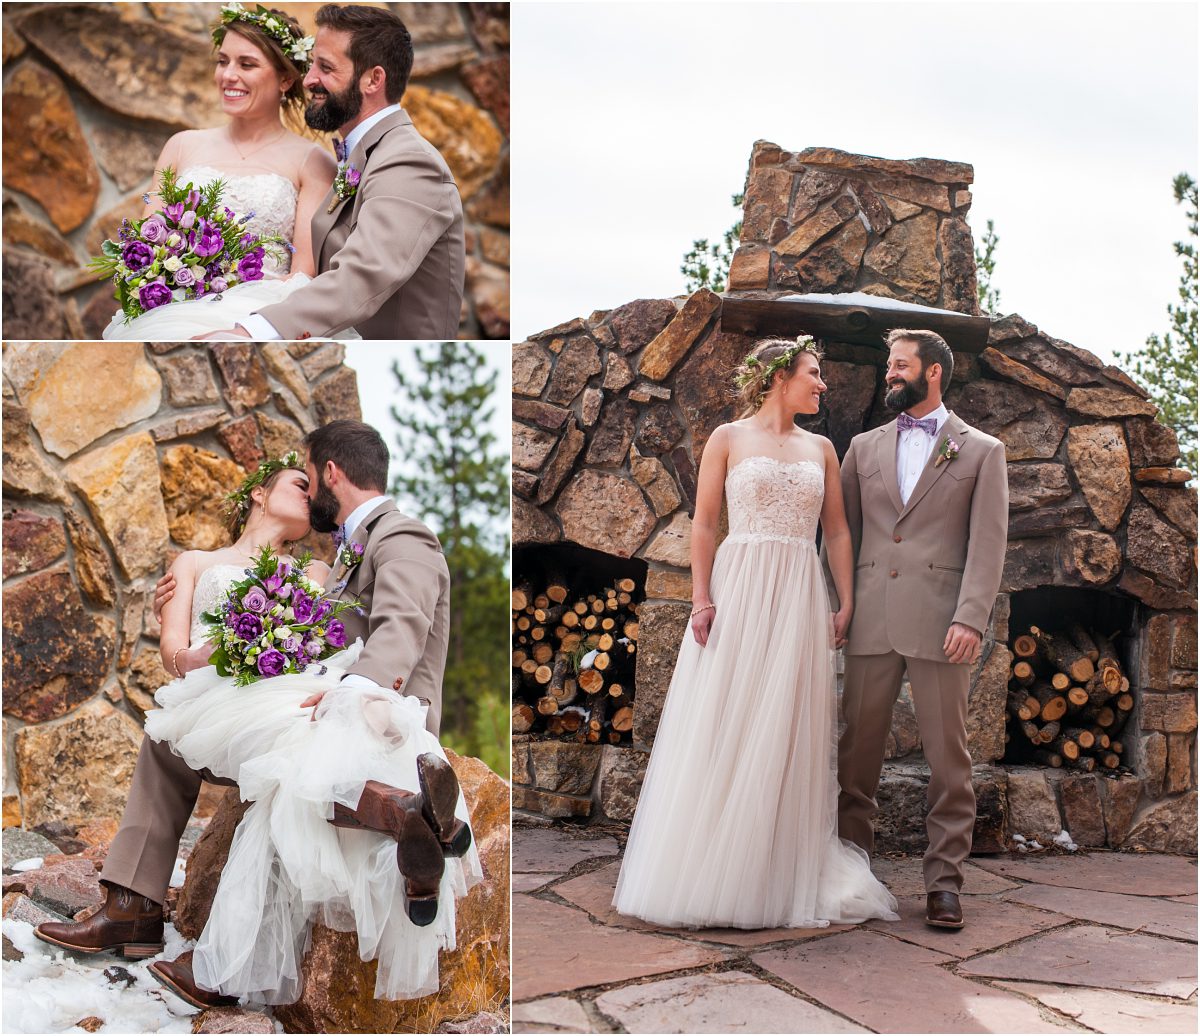 tishreed lodge wedding couples portraits, bride and groom in front of stone wood burning fireplace, rustic mountain wedding photography, colorado destination wedding planning